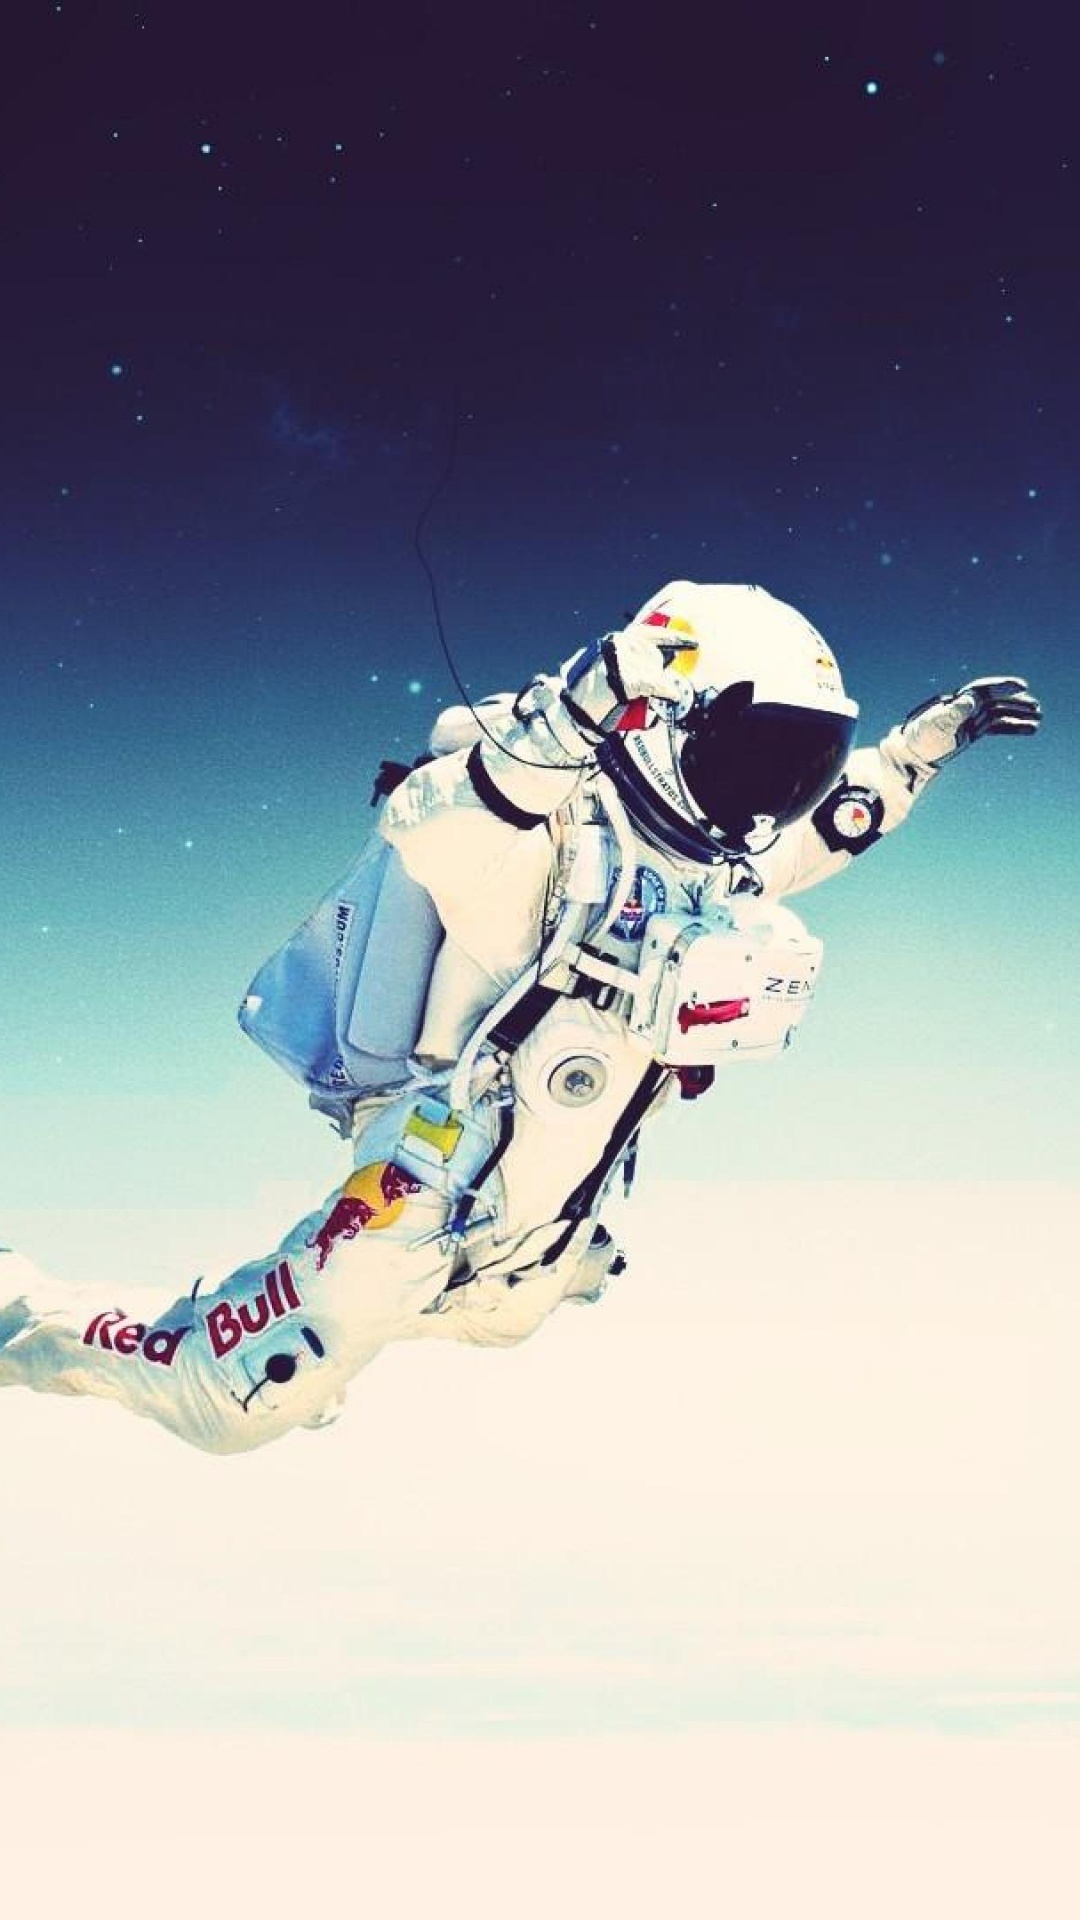 Man in White and Blue Suit Doing Sky Diving. Wallpaper in 1080x1920 Resolution